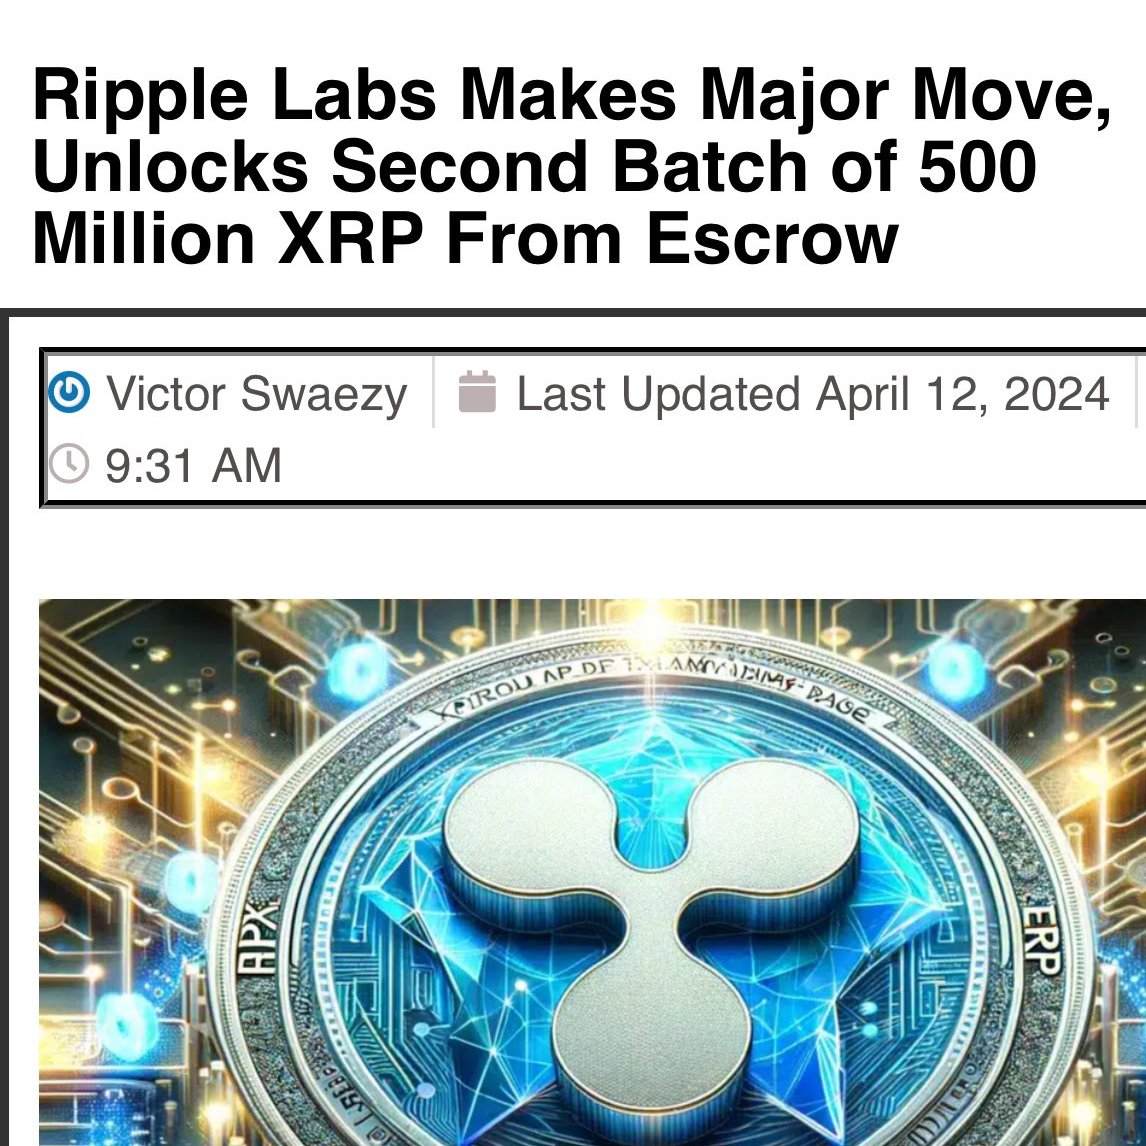 Ripple Labs has recently unlocked 500 million #XRP tokens valued at over $295,100,000 in the past day. This coincides with rumors of #Ripple possibly settling with the SEC, following an internal settlement meeting. Additionally, the top DeFi token on the XRP Ledger, @TokenCTF,…